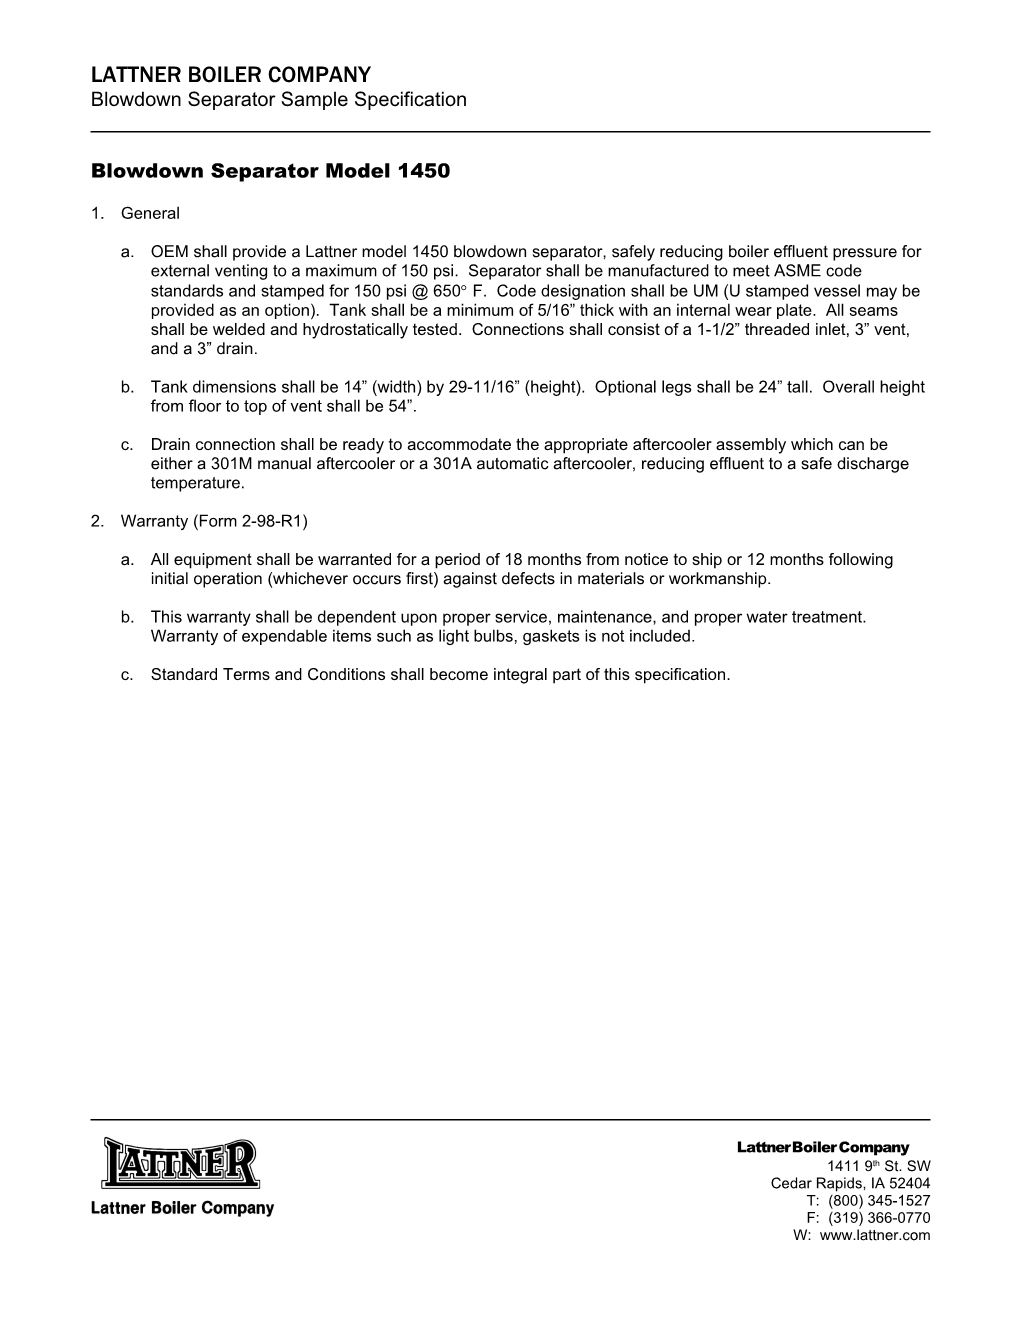 Boiler System Requirements Please Complete This Document and Return It to Us by Fax